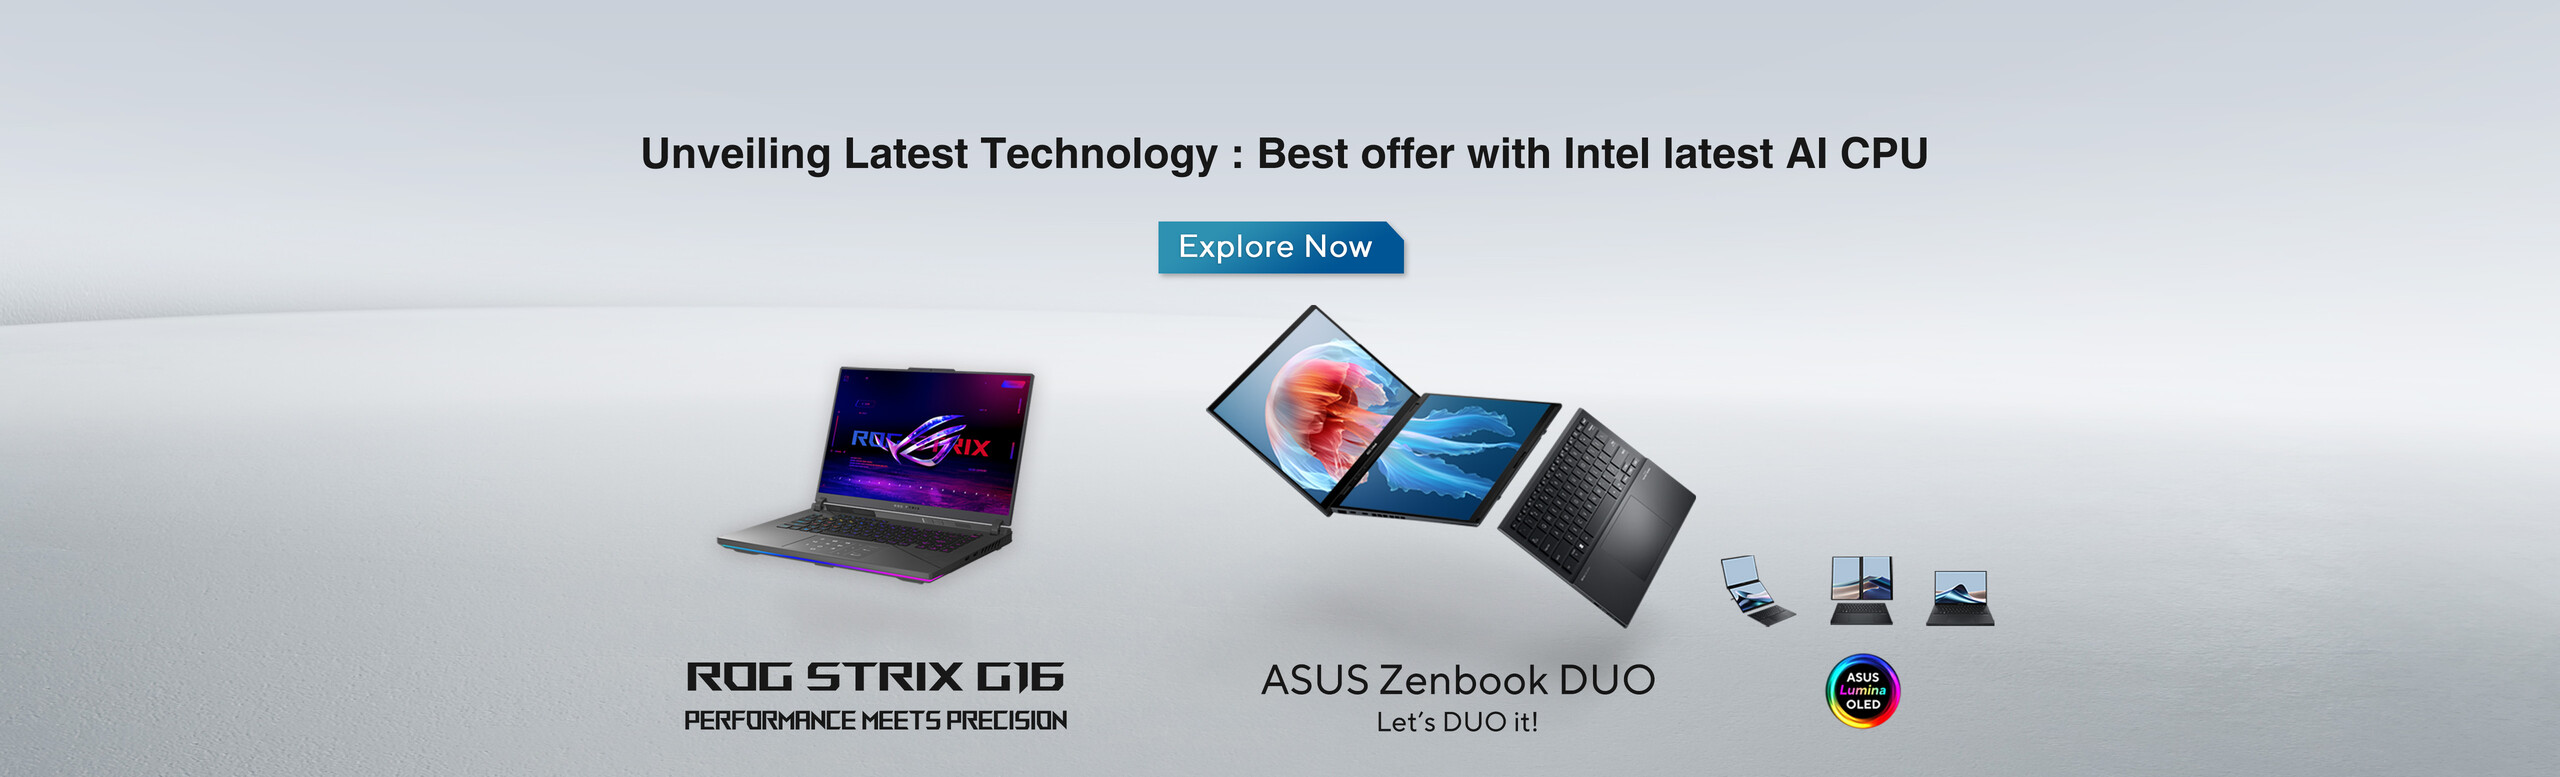 Unveiling latest technology: best offer with Intel latest AI CPU